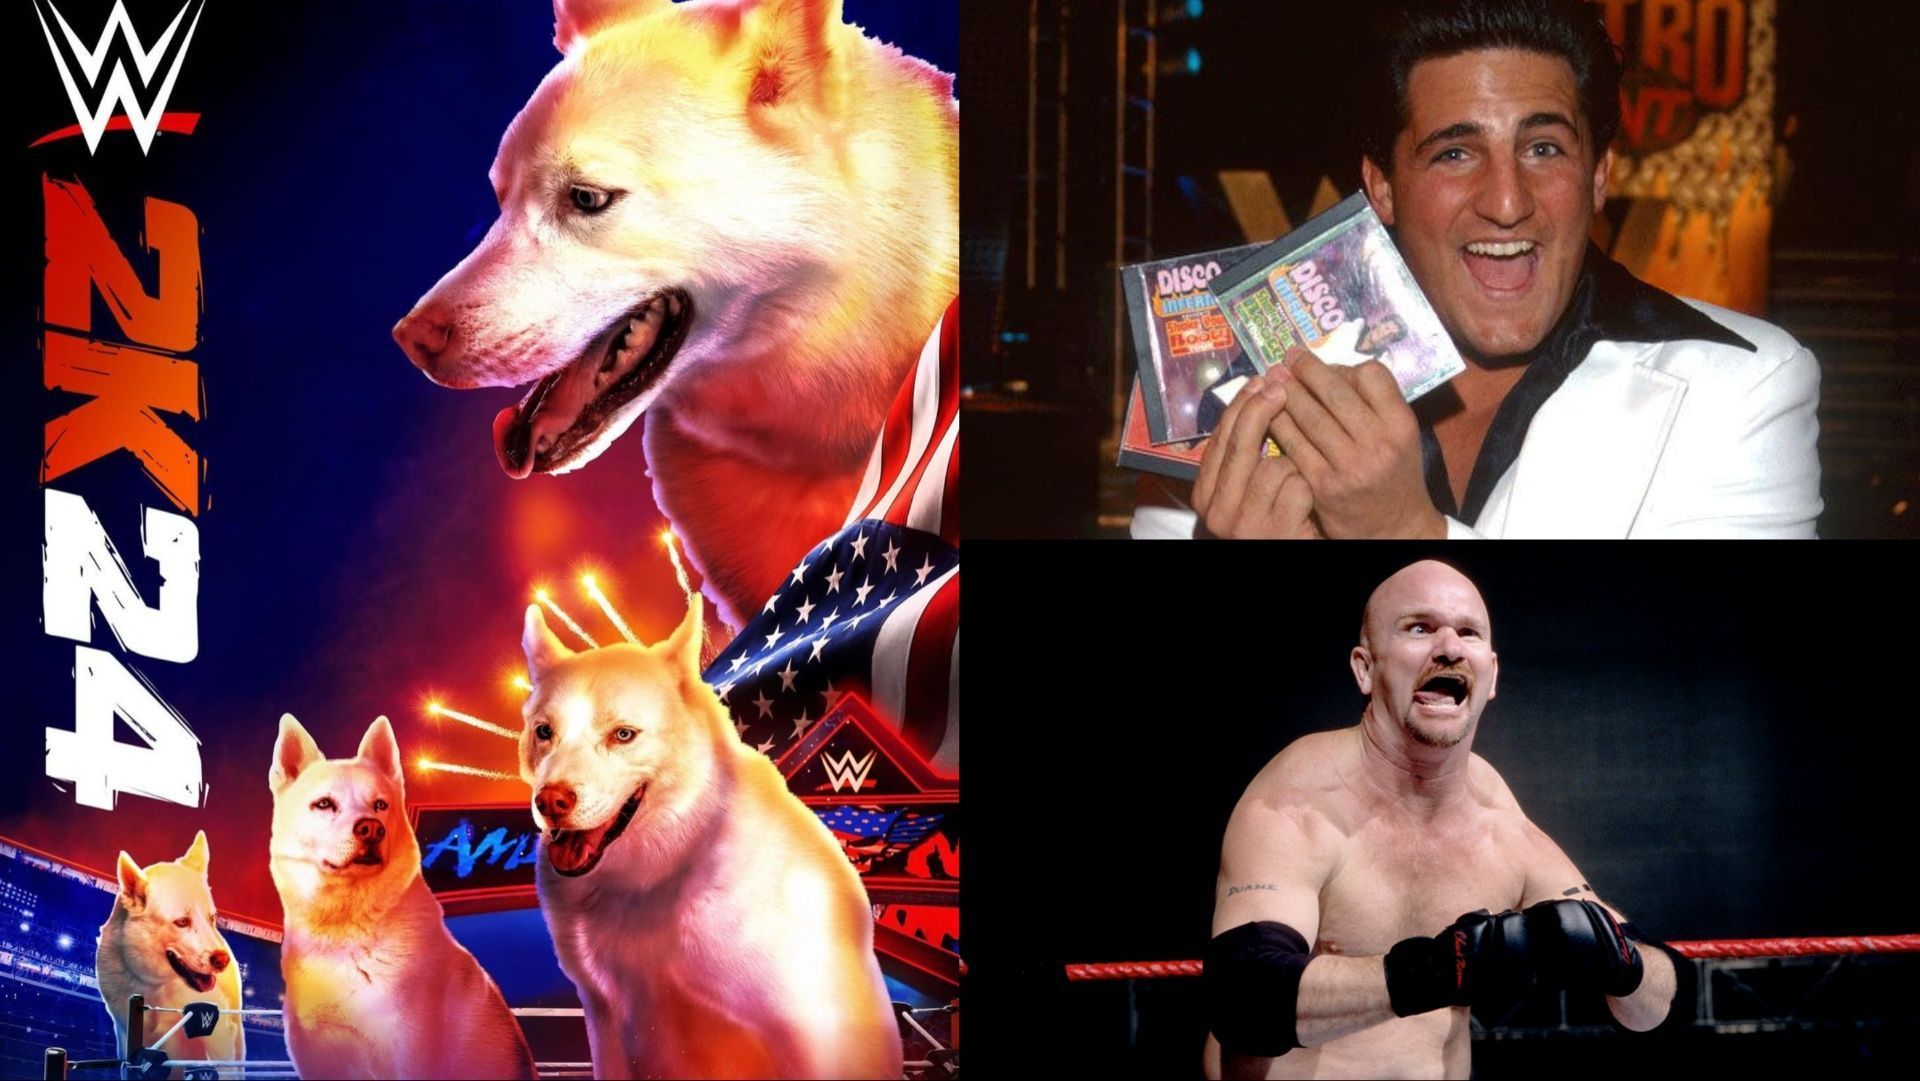 Disco Inferno and Gillberg have never appeared in a WWE wrestling video game.